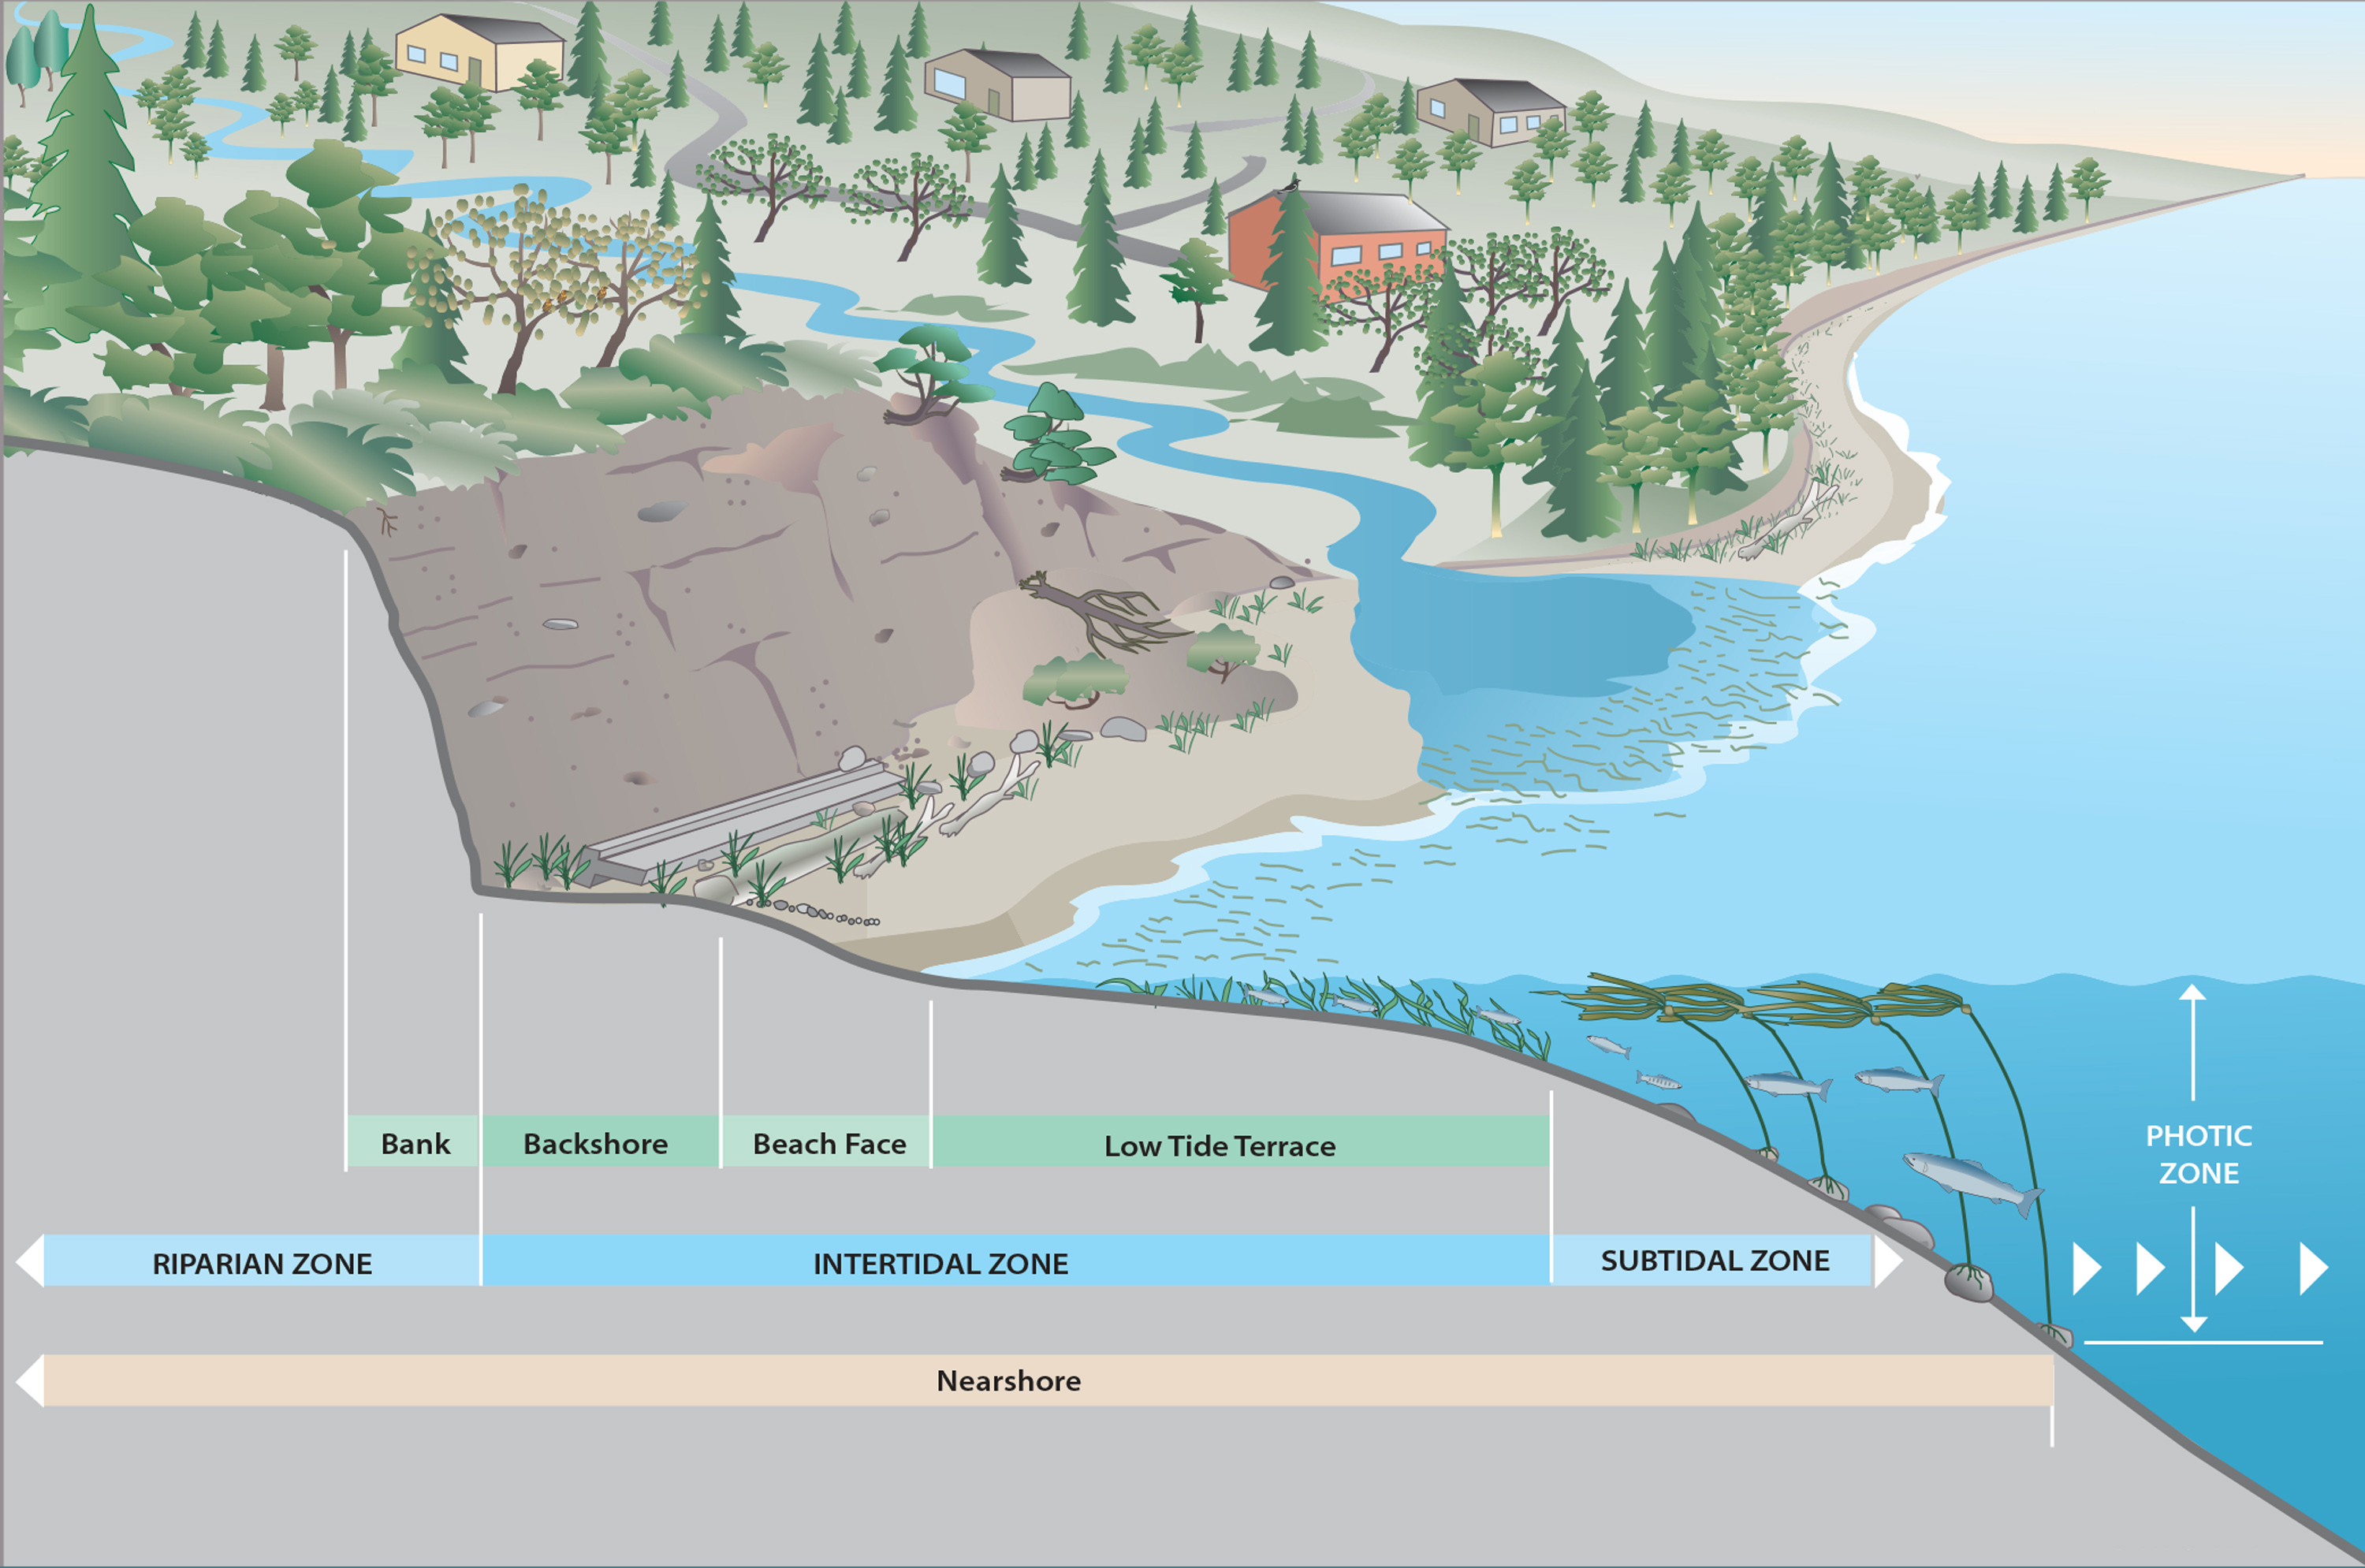 Graphic that shows the nearshore area of a shoreline, where the nearshore area extends from feeder bluffs on the land to the subtidal zone in the water